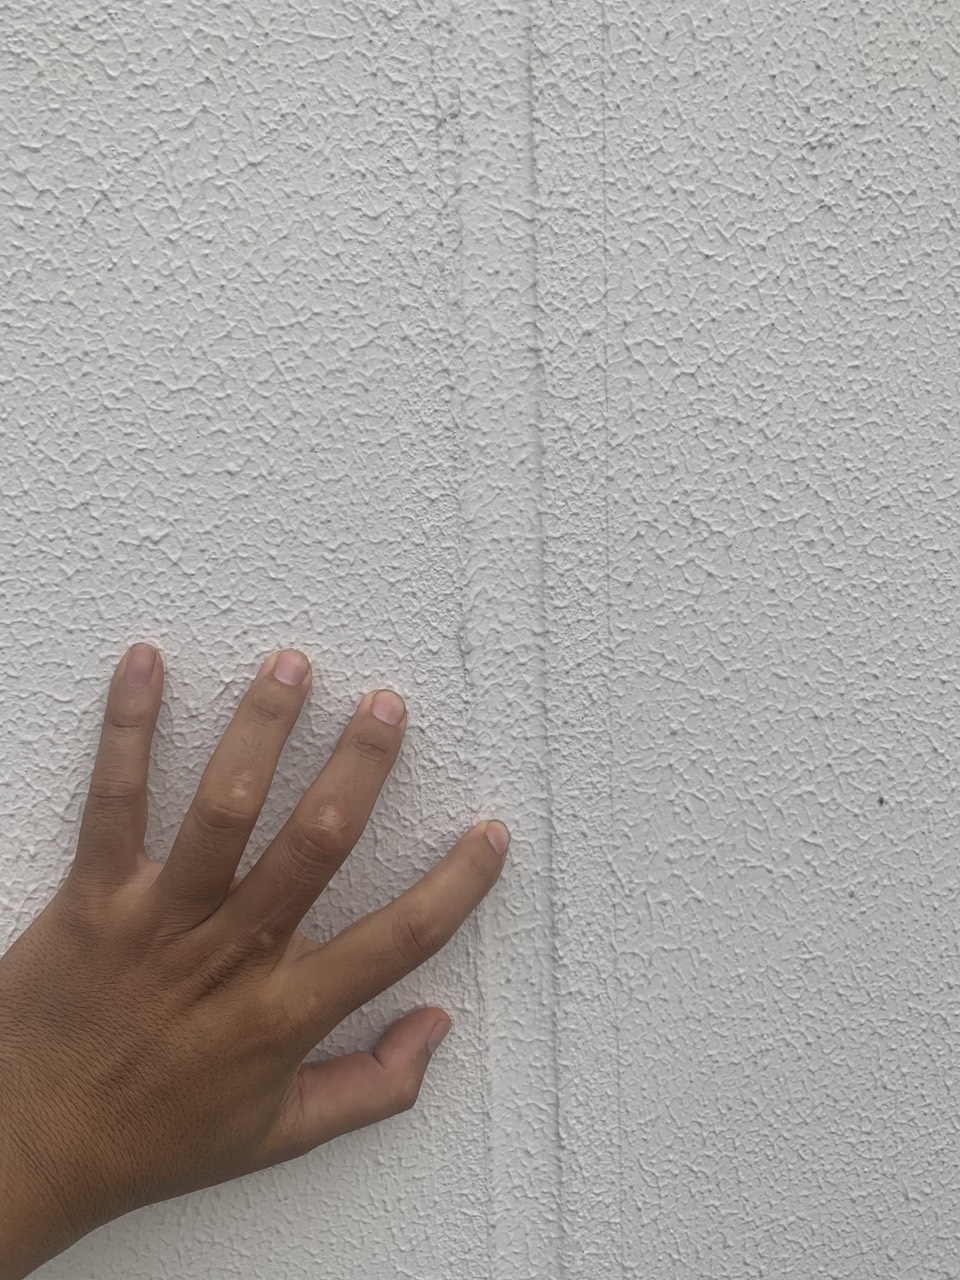 Paintable MS sealant for wall joints at Aeon Mall Ha Dong